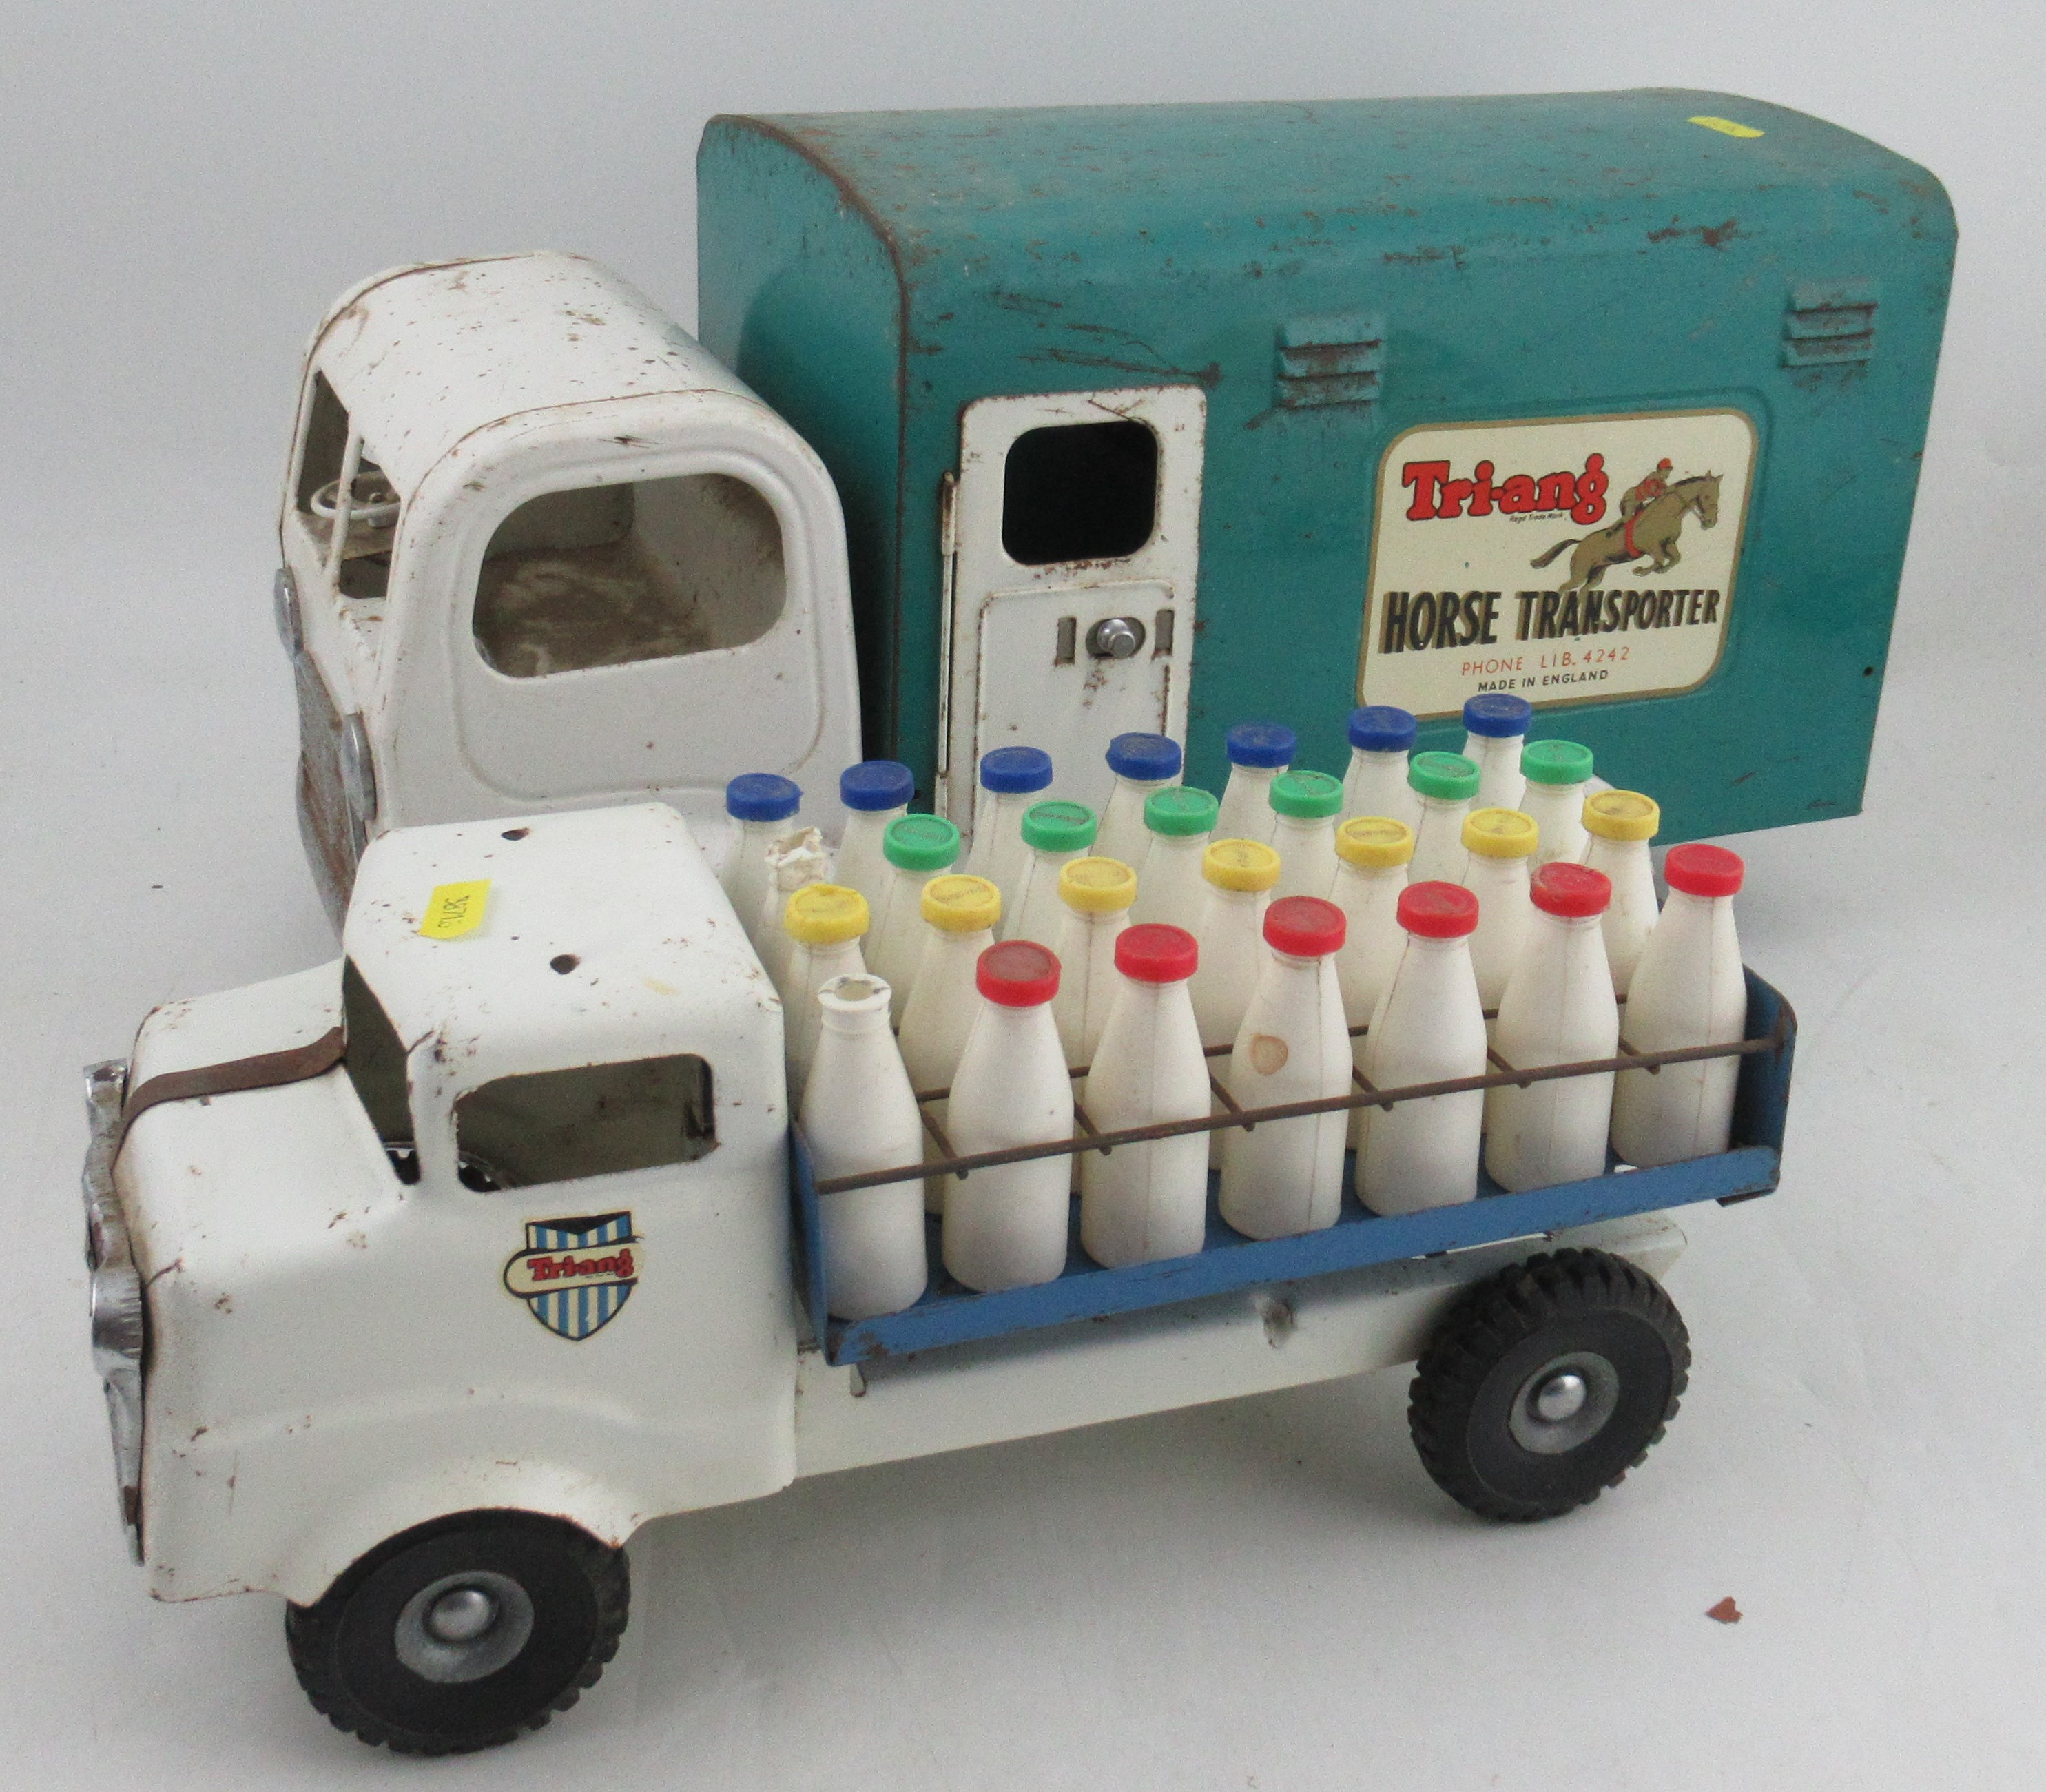 A Tri-ang Horse Transporter, together with a Tri-ang milk float with milk bottles